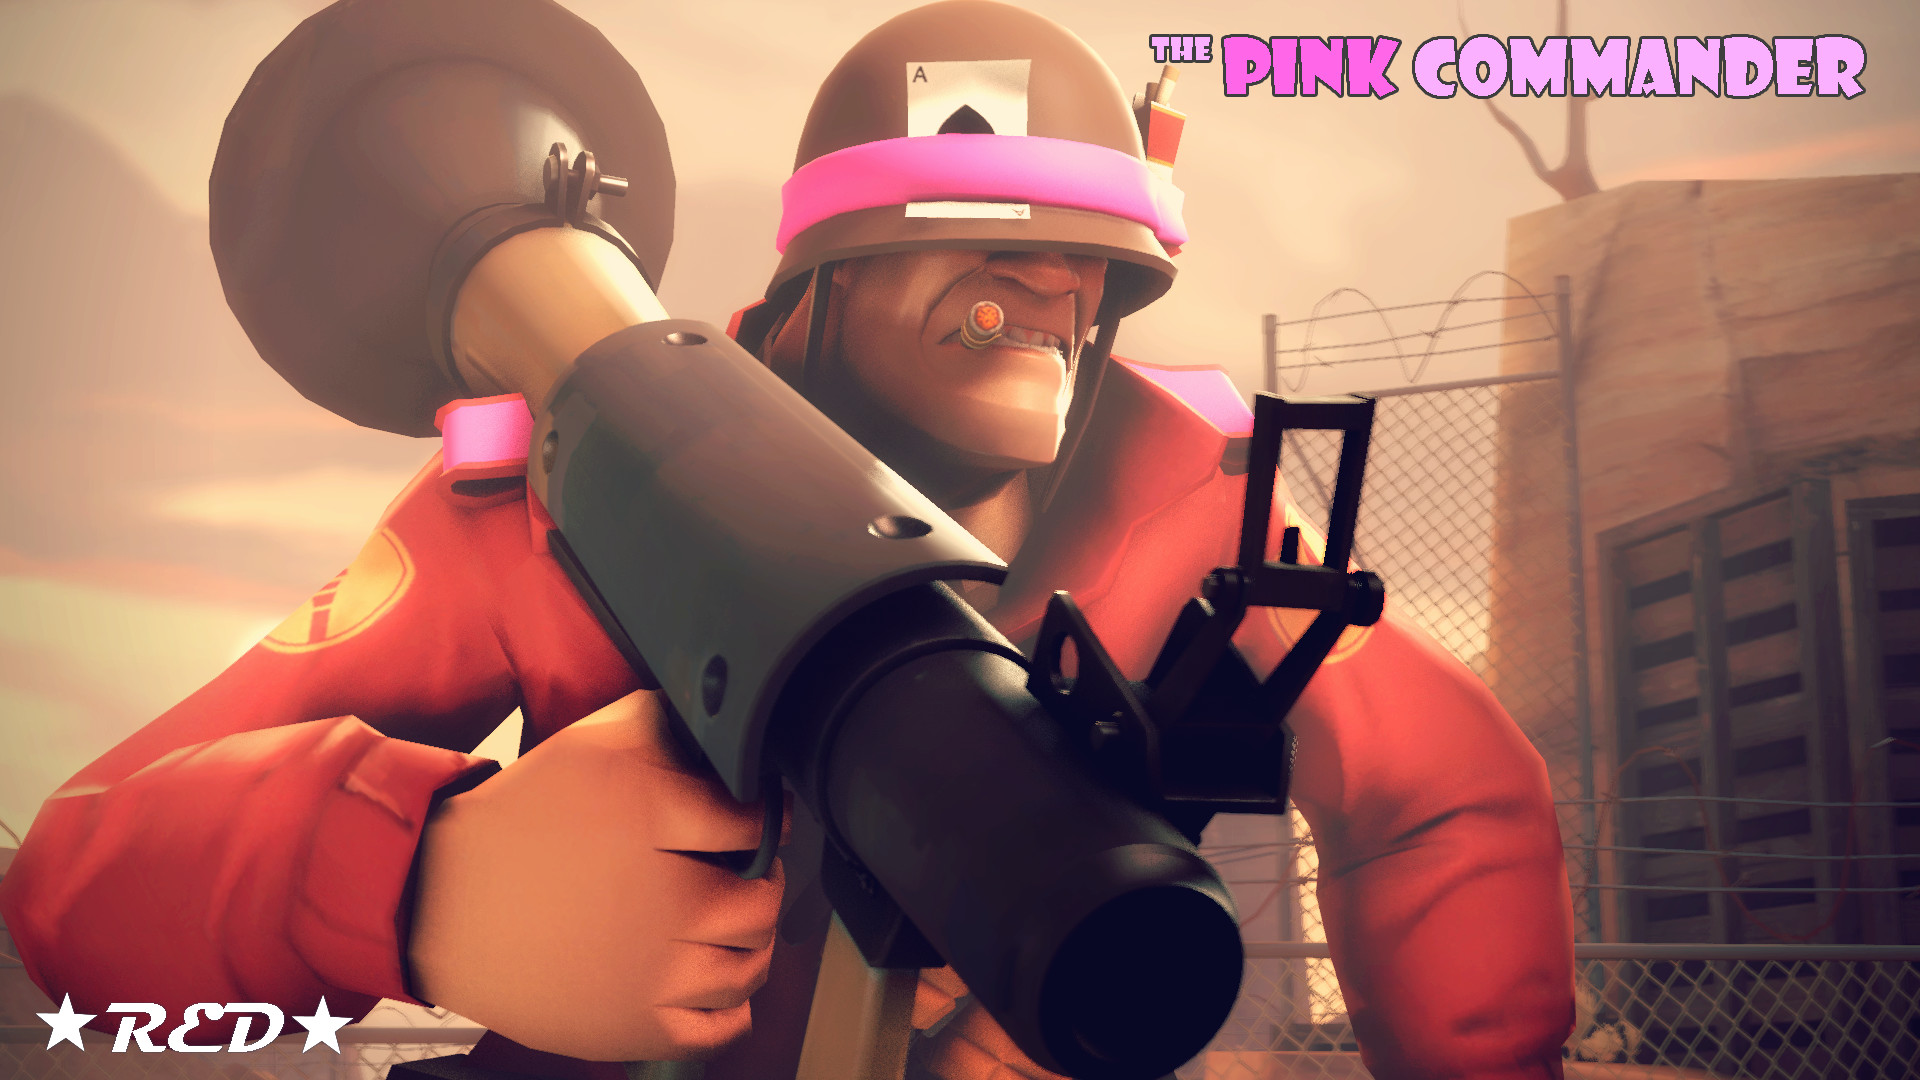 1920x1080 ... TF2 Loadout - Soldier (The Pink Comander) by nrgtfc